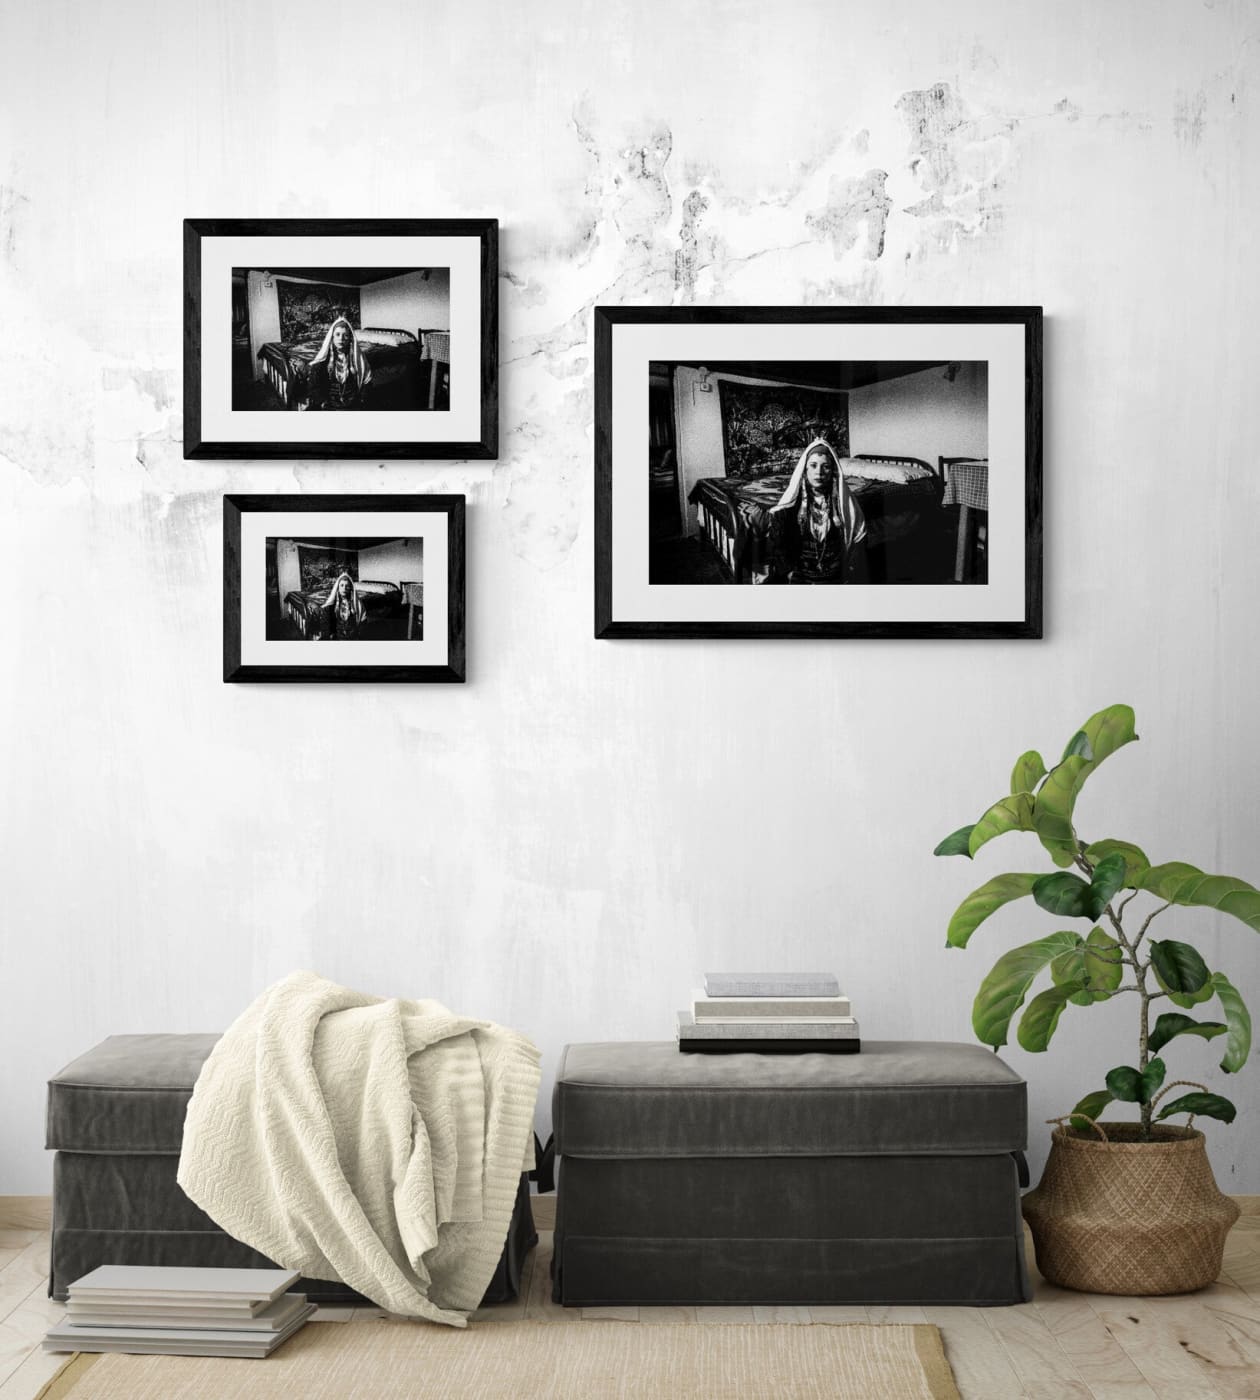 Black and White Photography Wall Art Greece | Isaakion Evros Thrace by George Tatakis - framing options